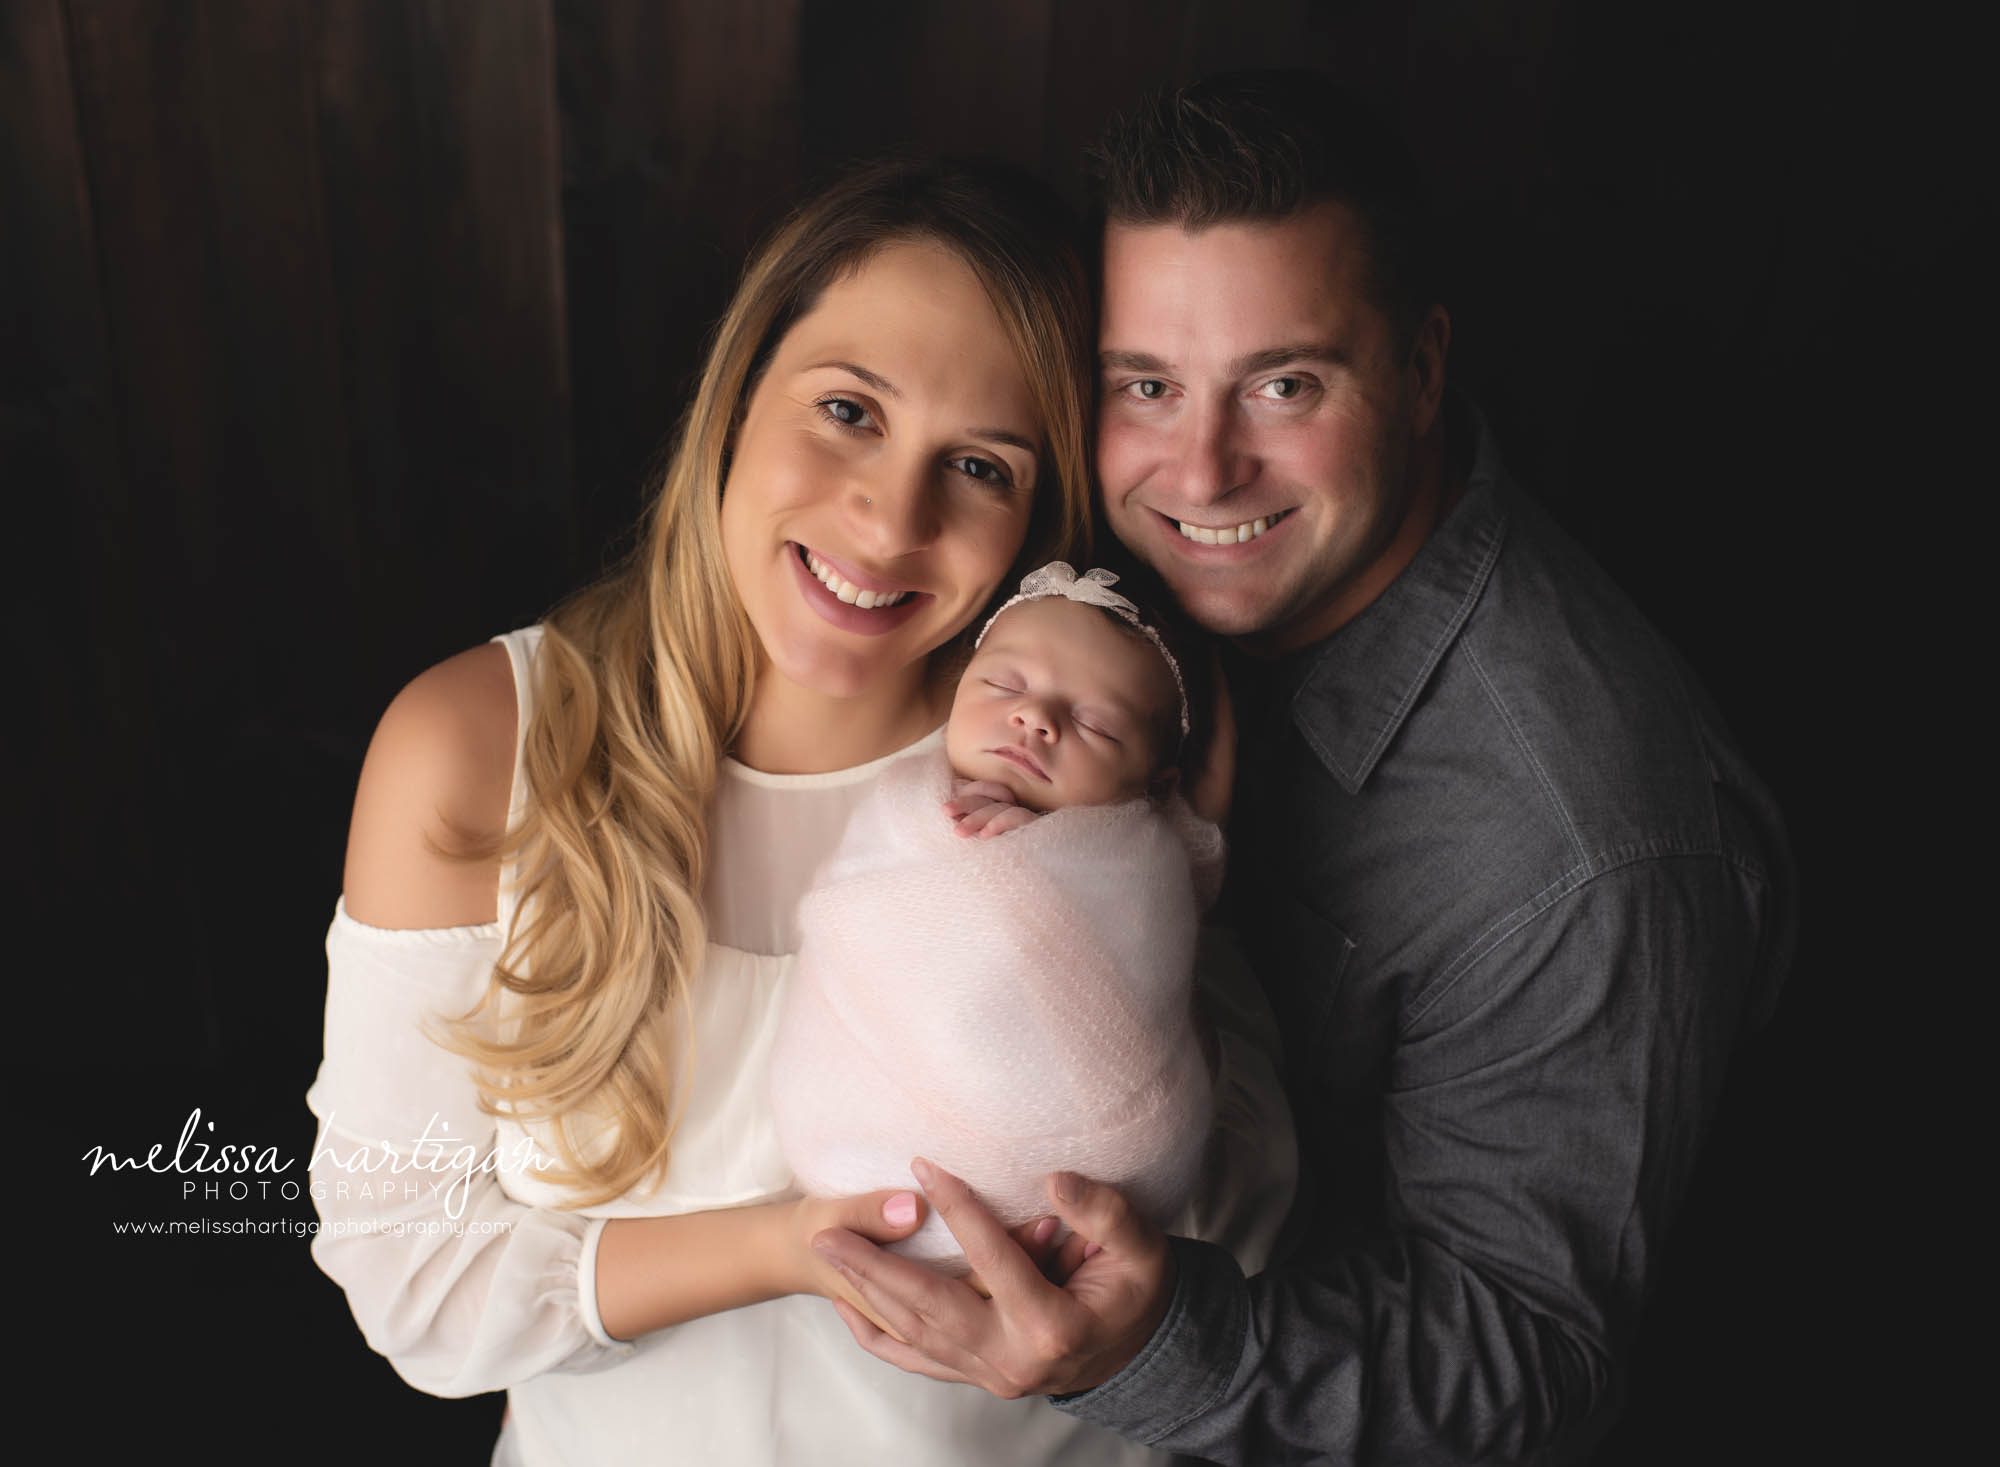 mom and dad holding newborn baby girl for first family photo in newborn photography studio session